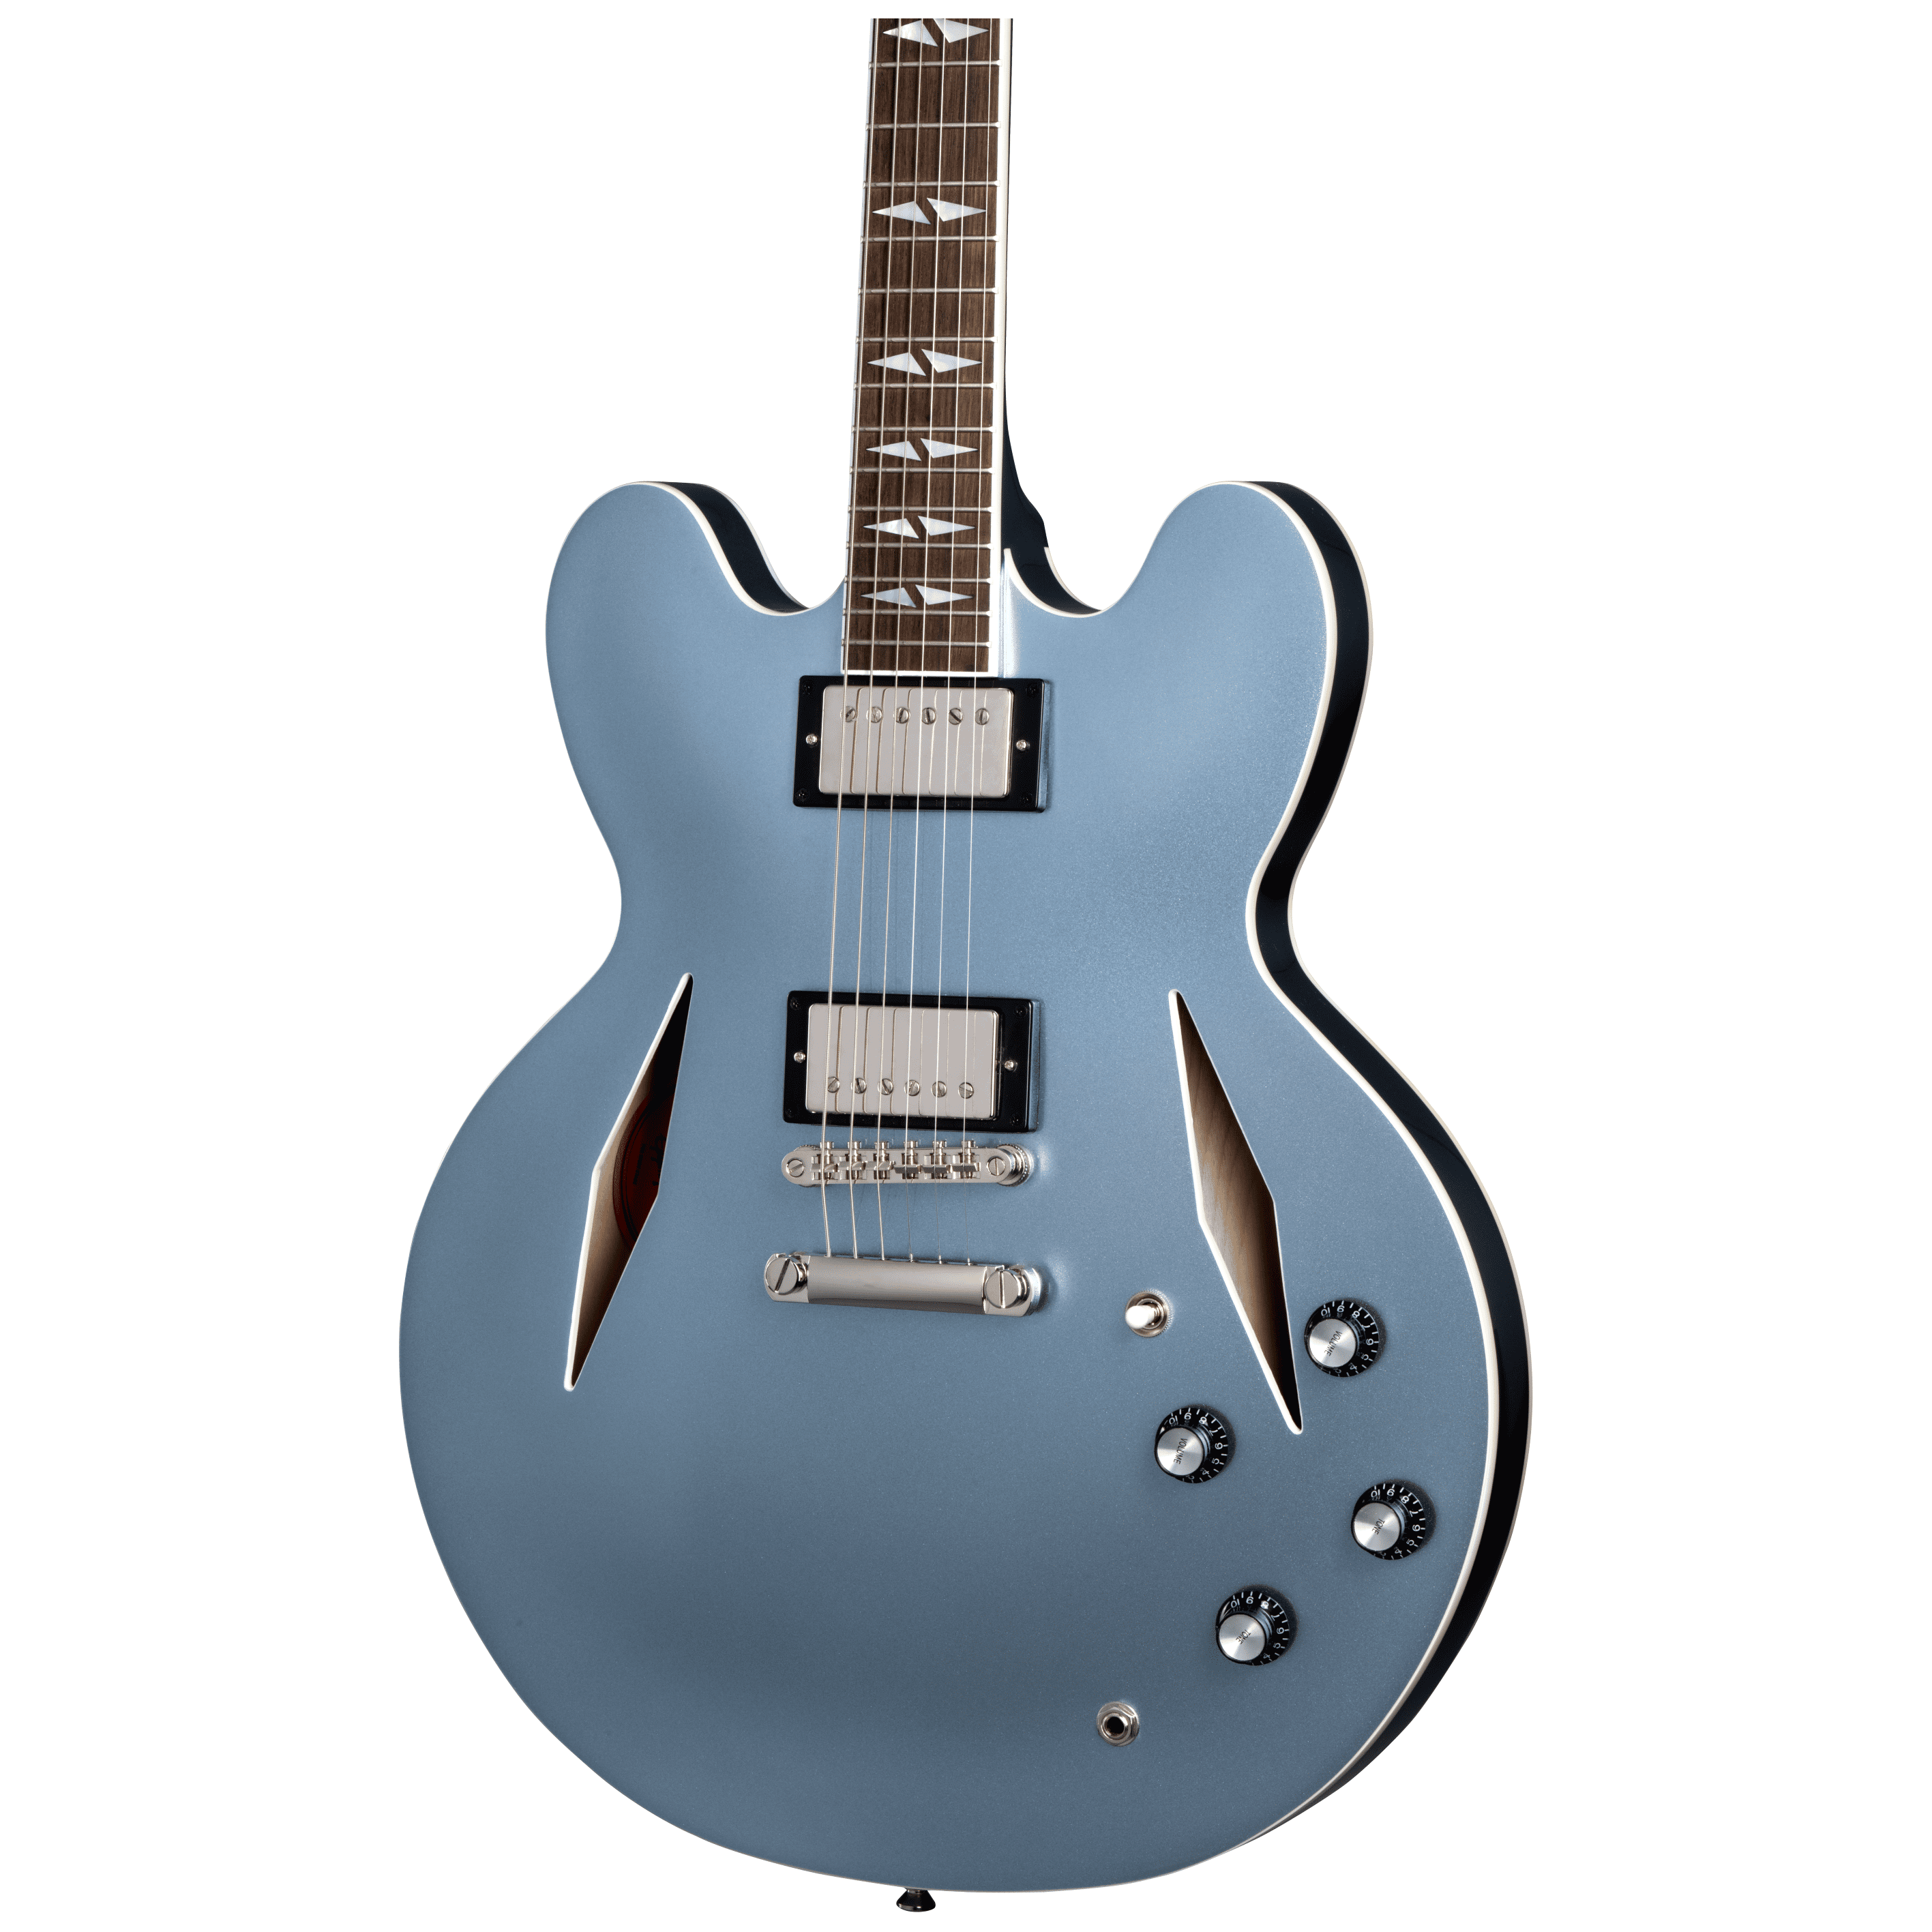 Epiphone Dave Grohl DG-335 4